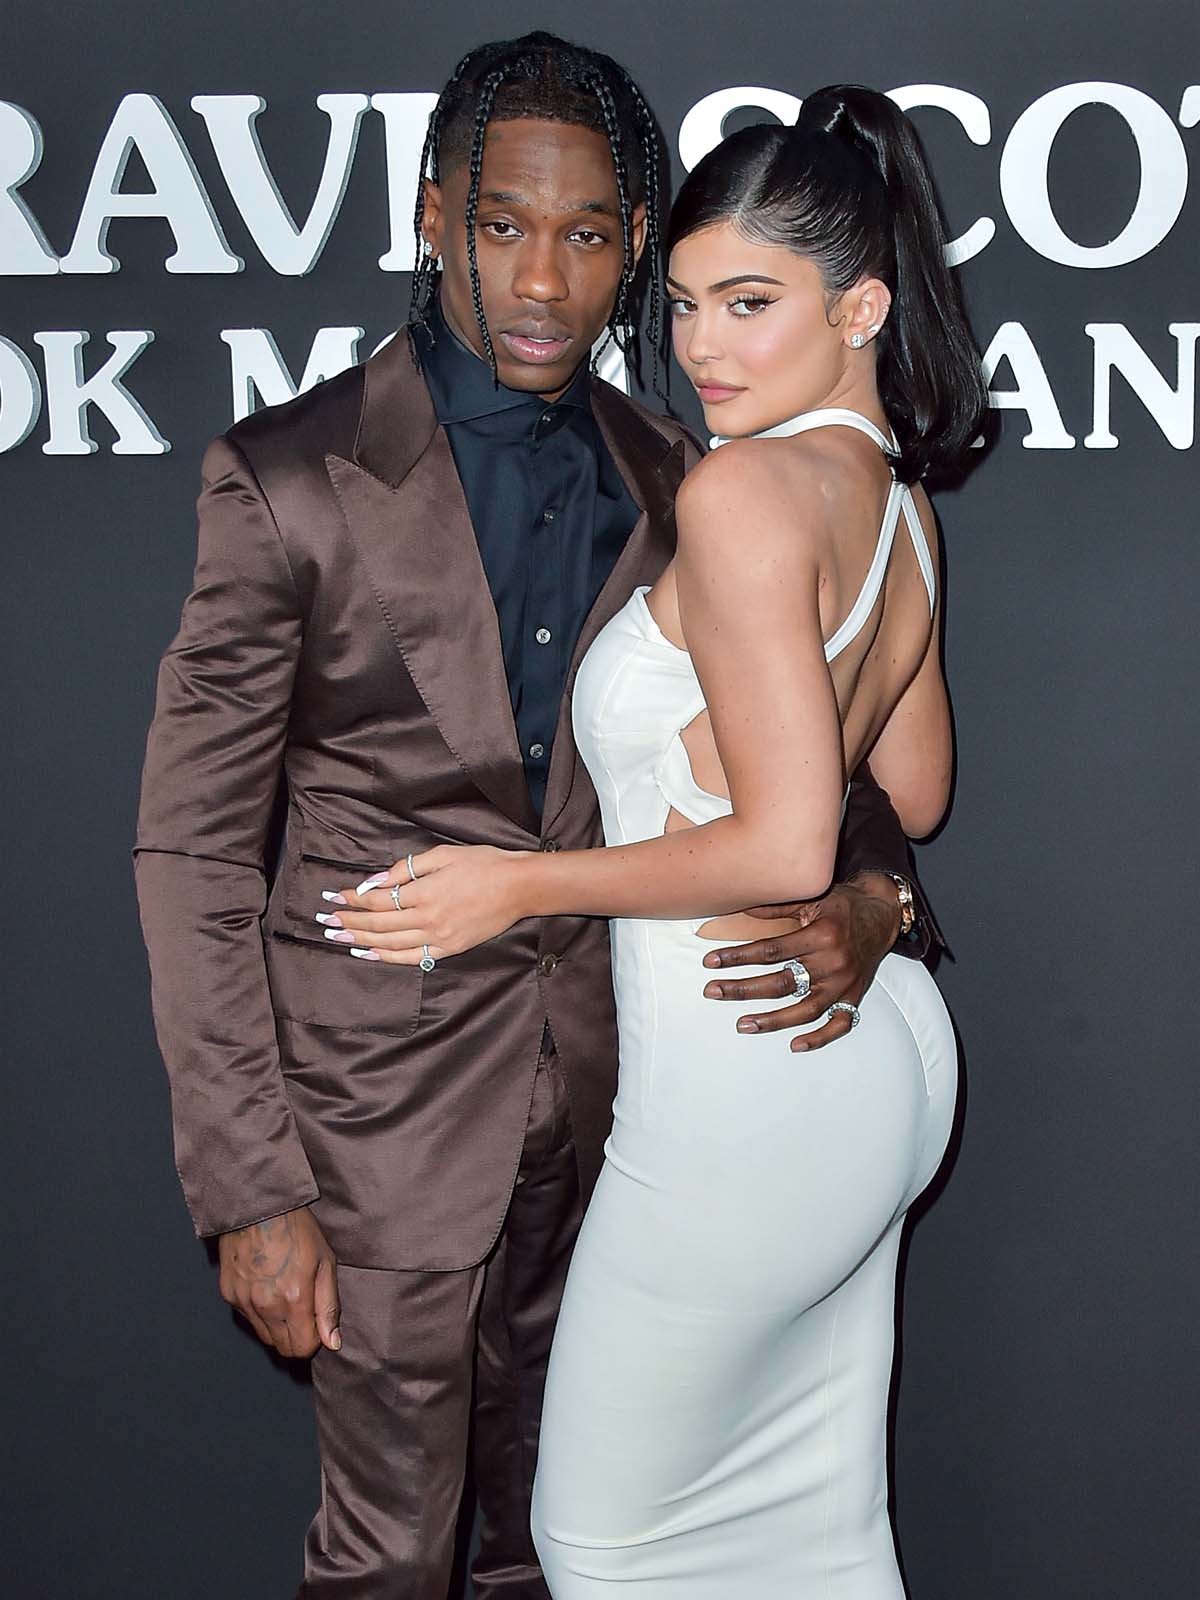 Kylie Jenner Travis Scott Dont Have A Traditional Relationship 